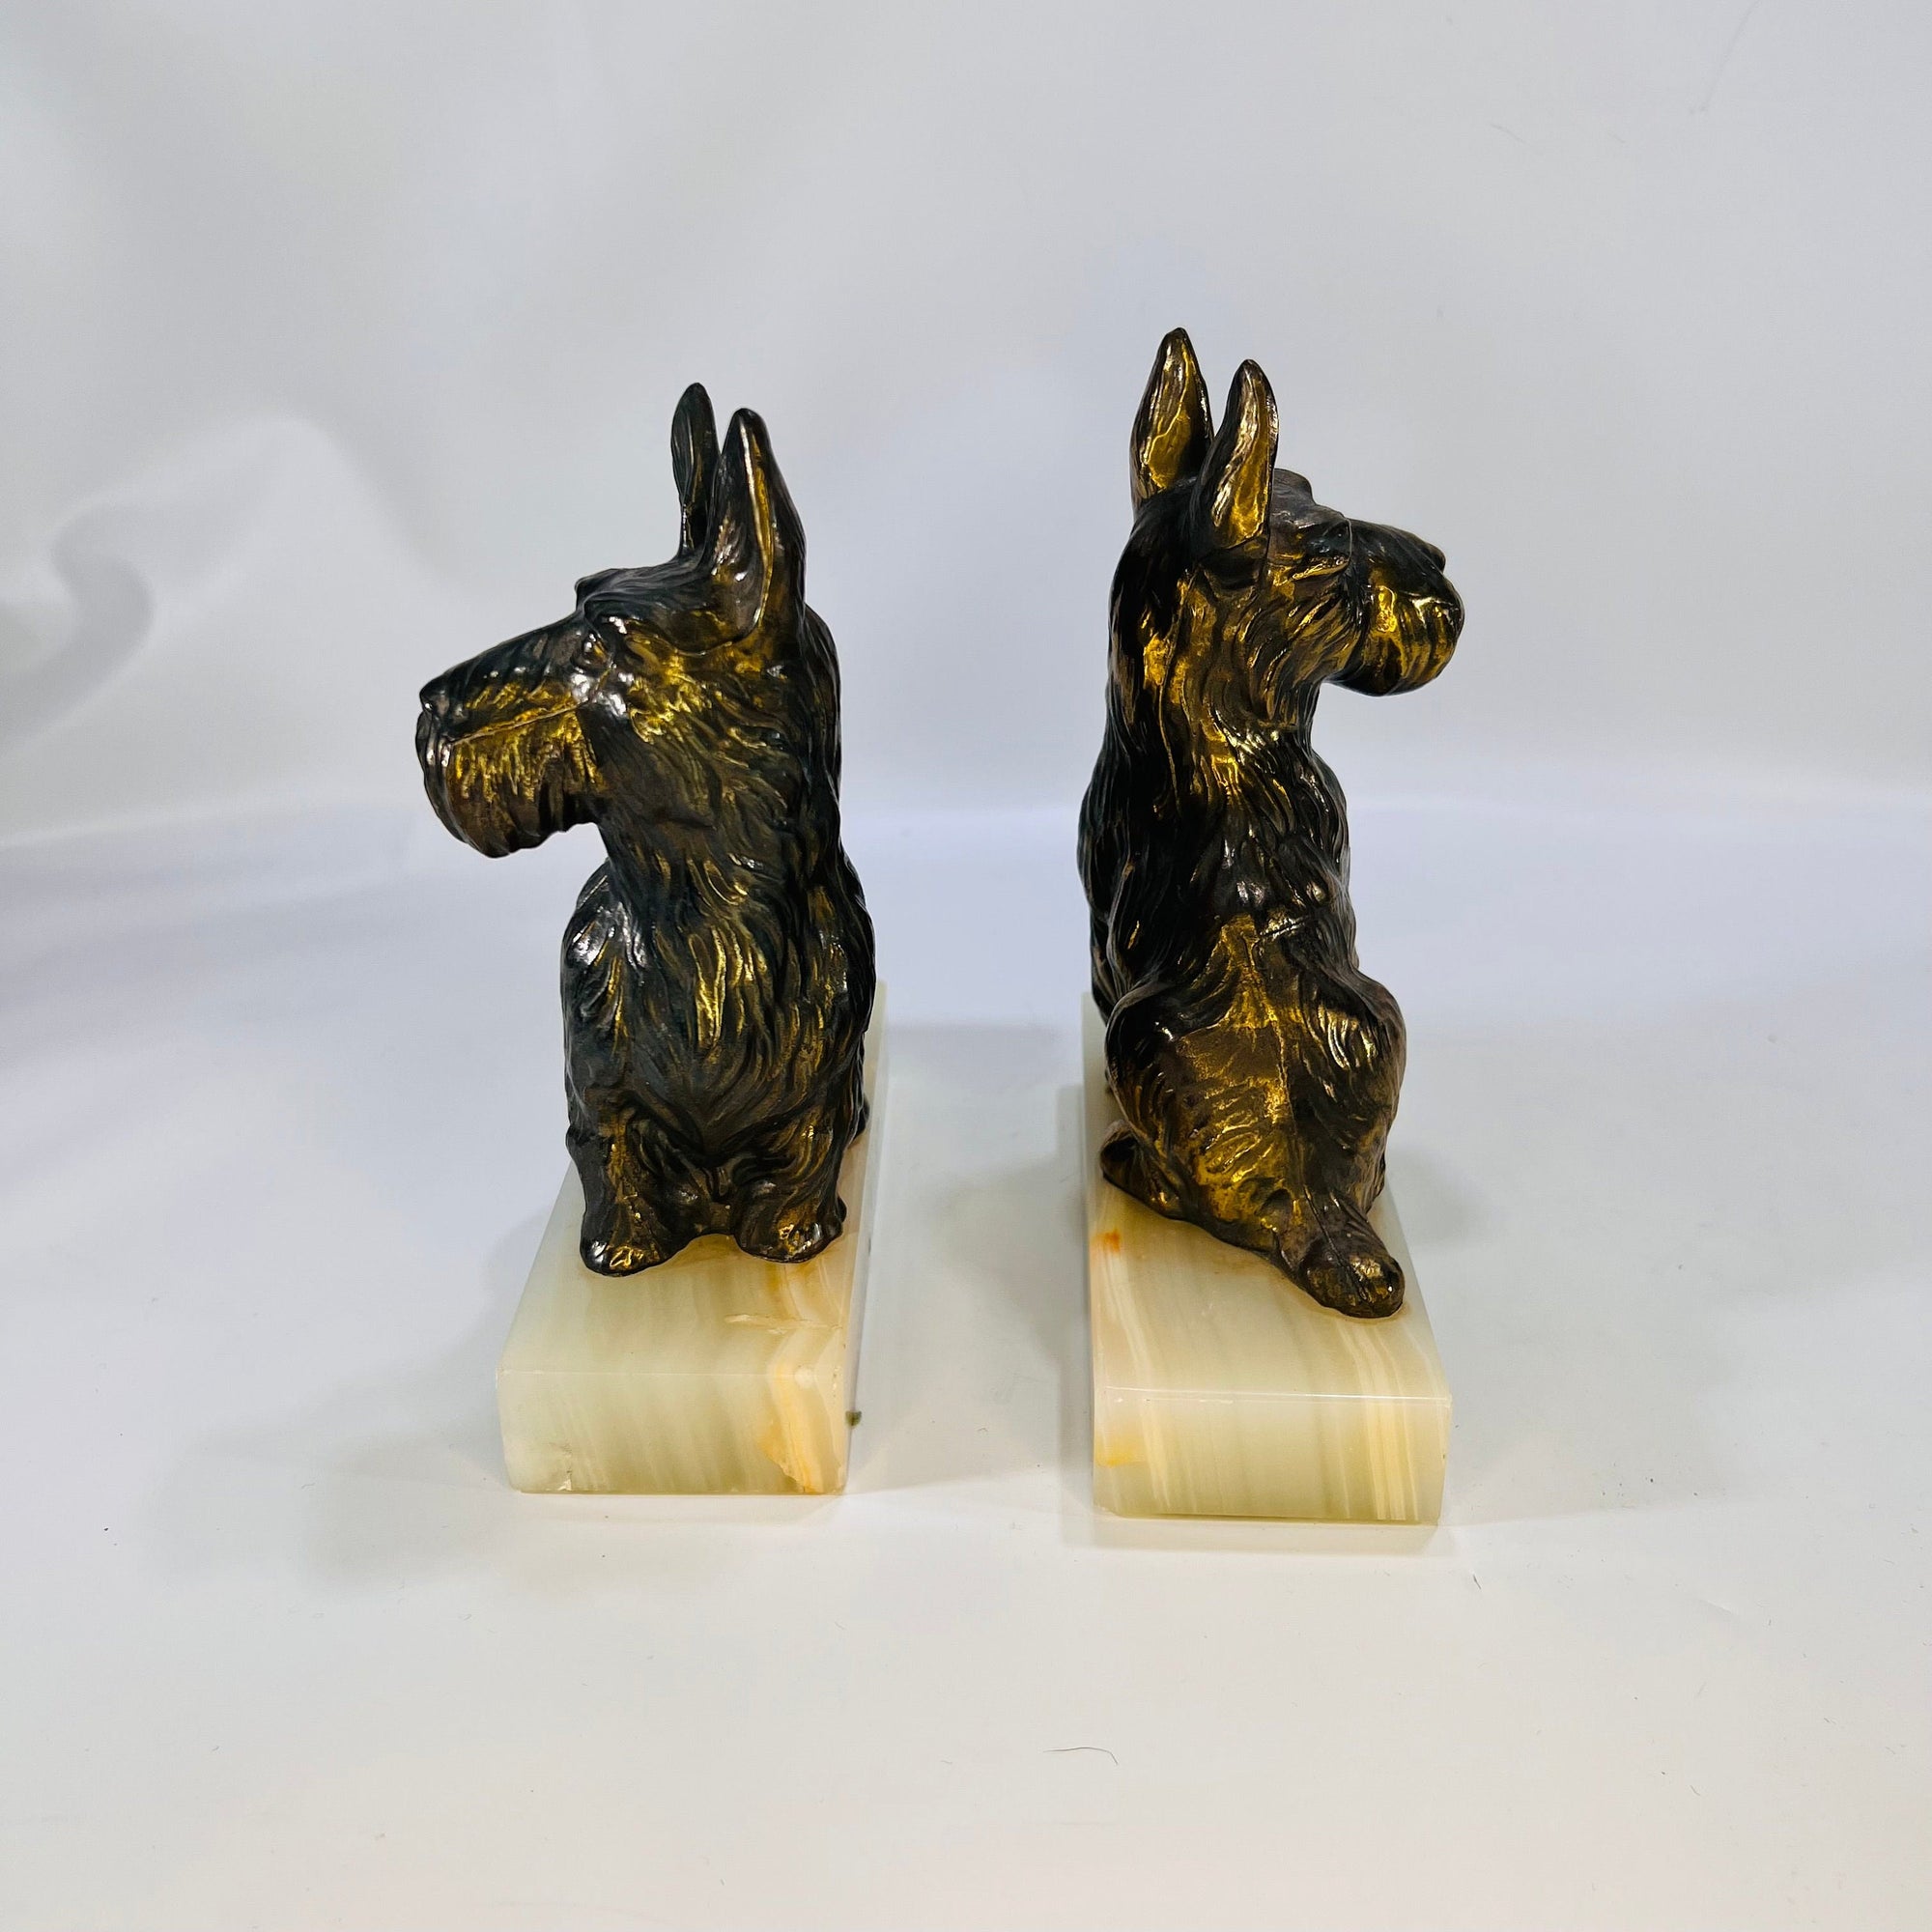 Pair of Scottish Terrier Dog Metal Bookends with Stone Base 1950s Vintage